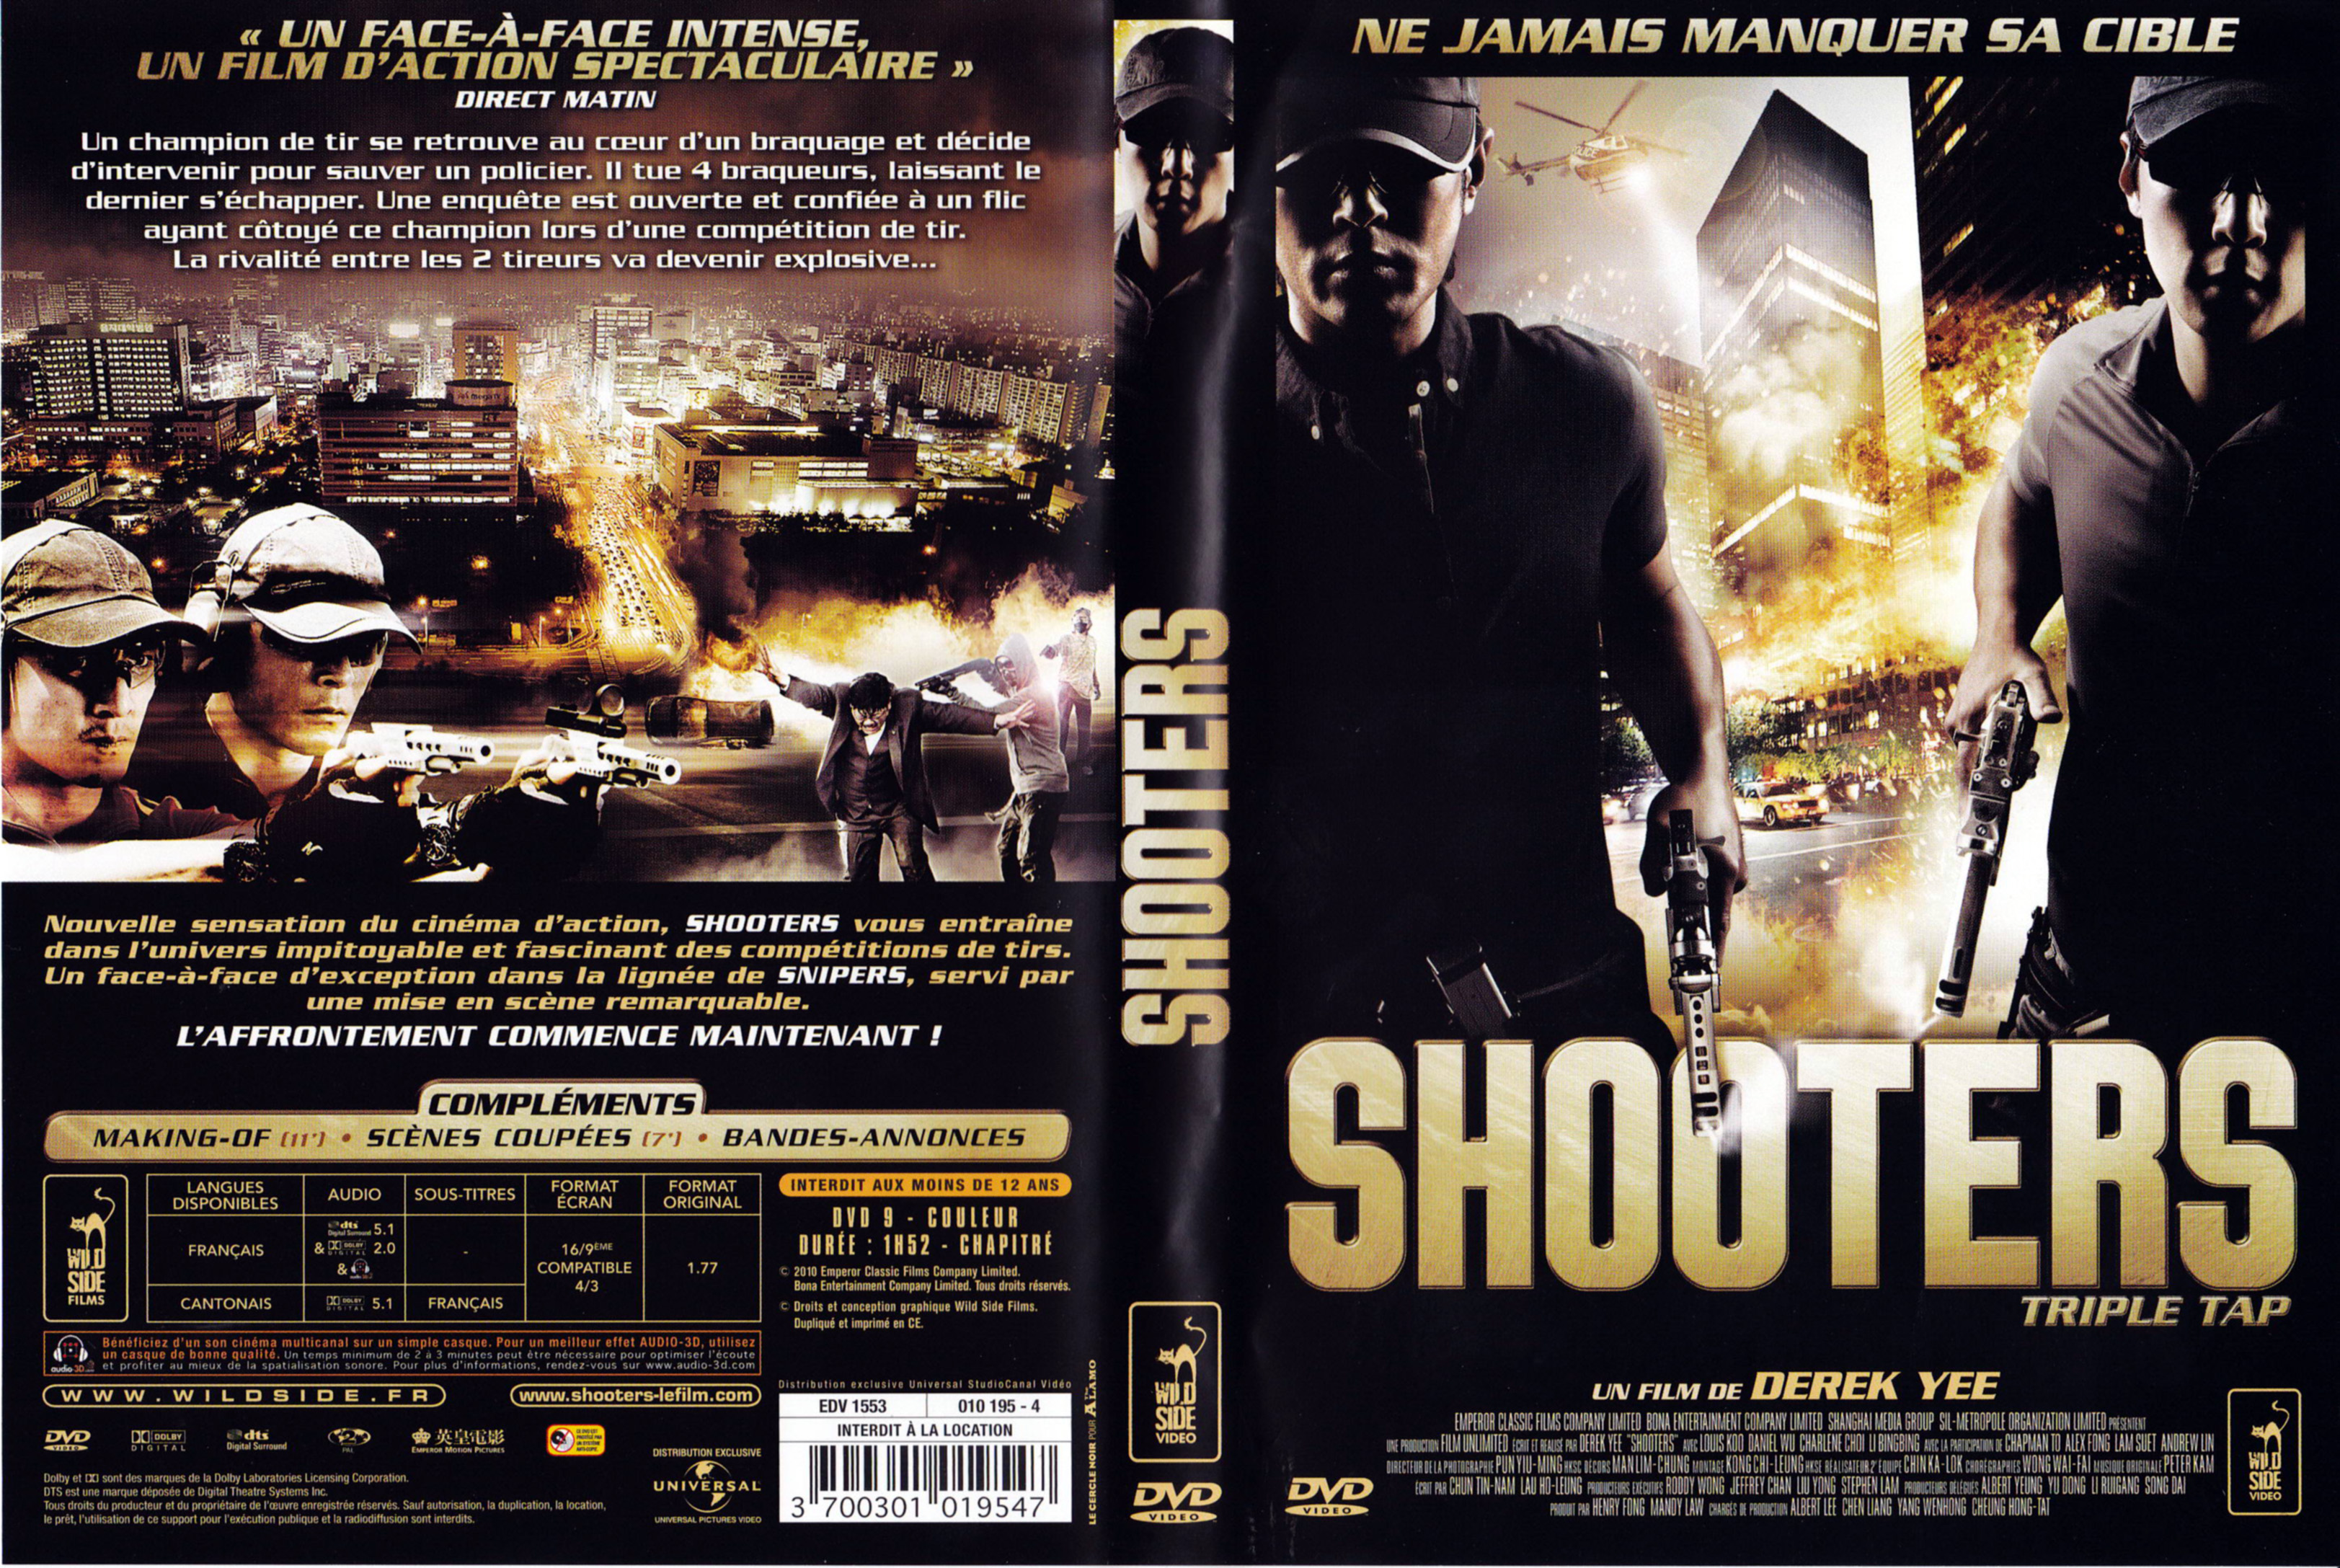 Jaquette DVD Shooters (2010)